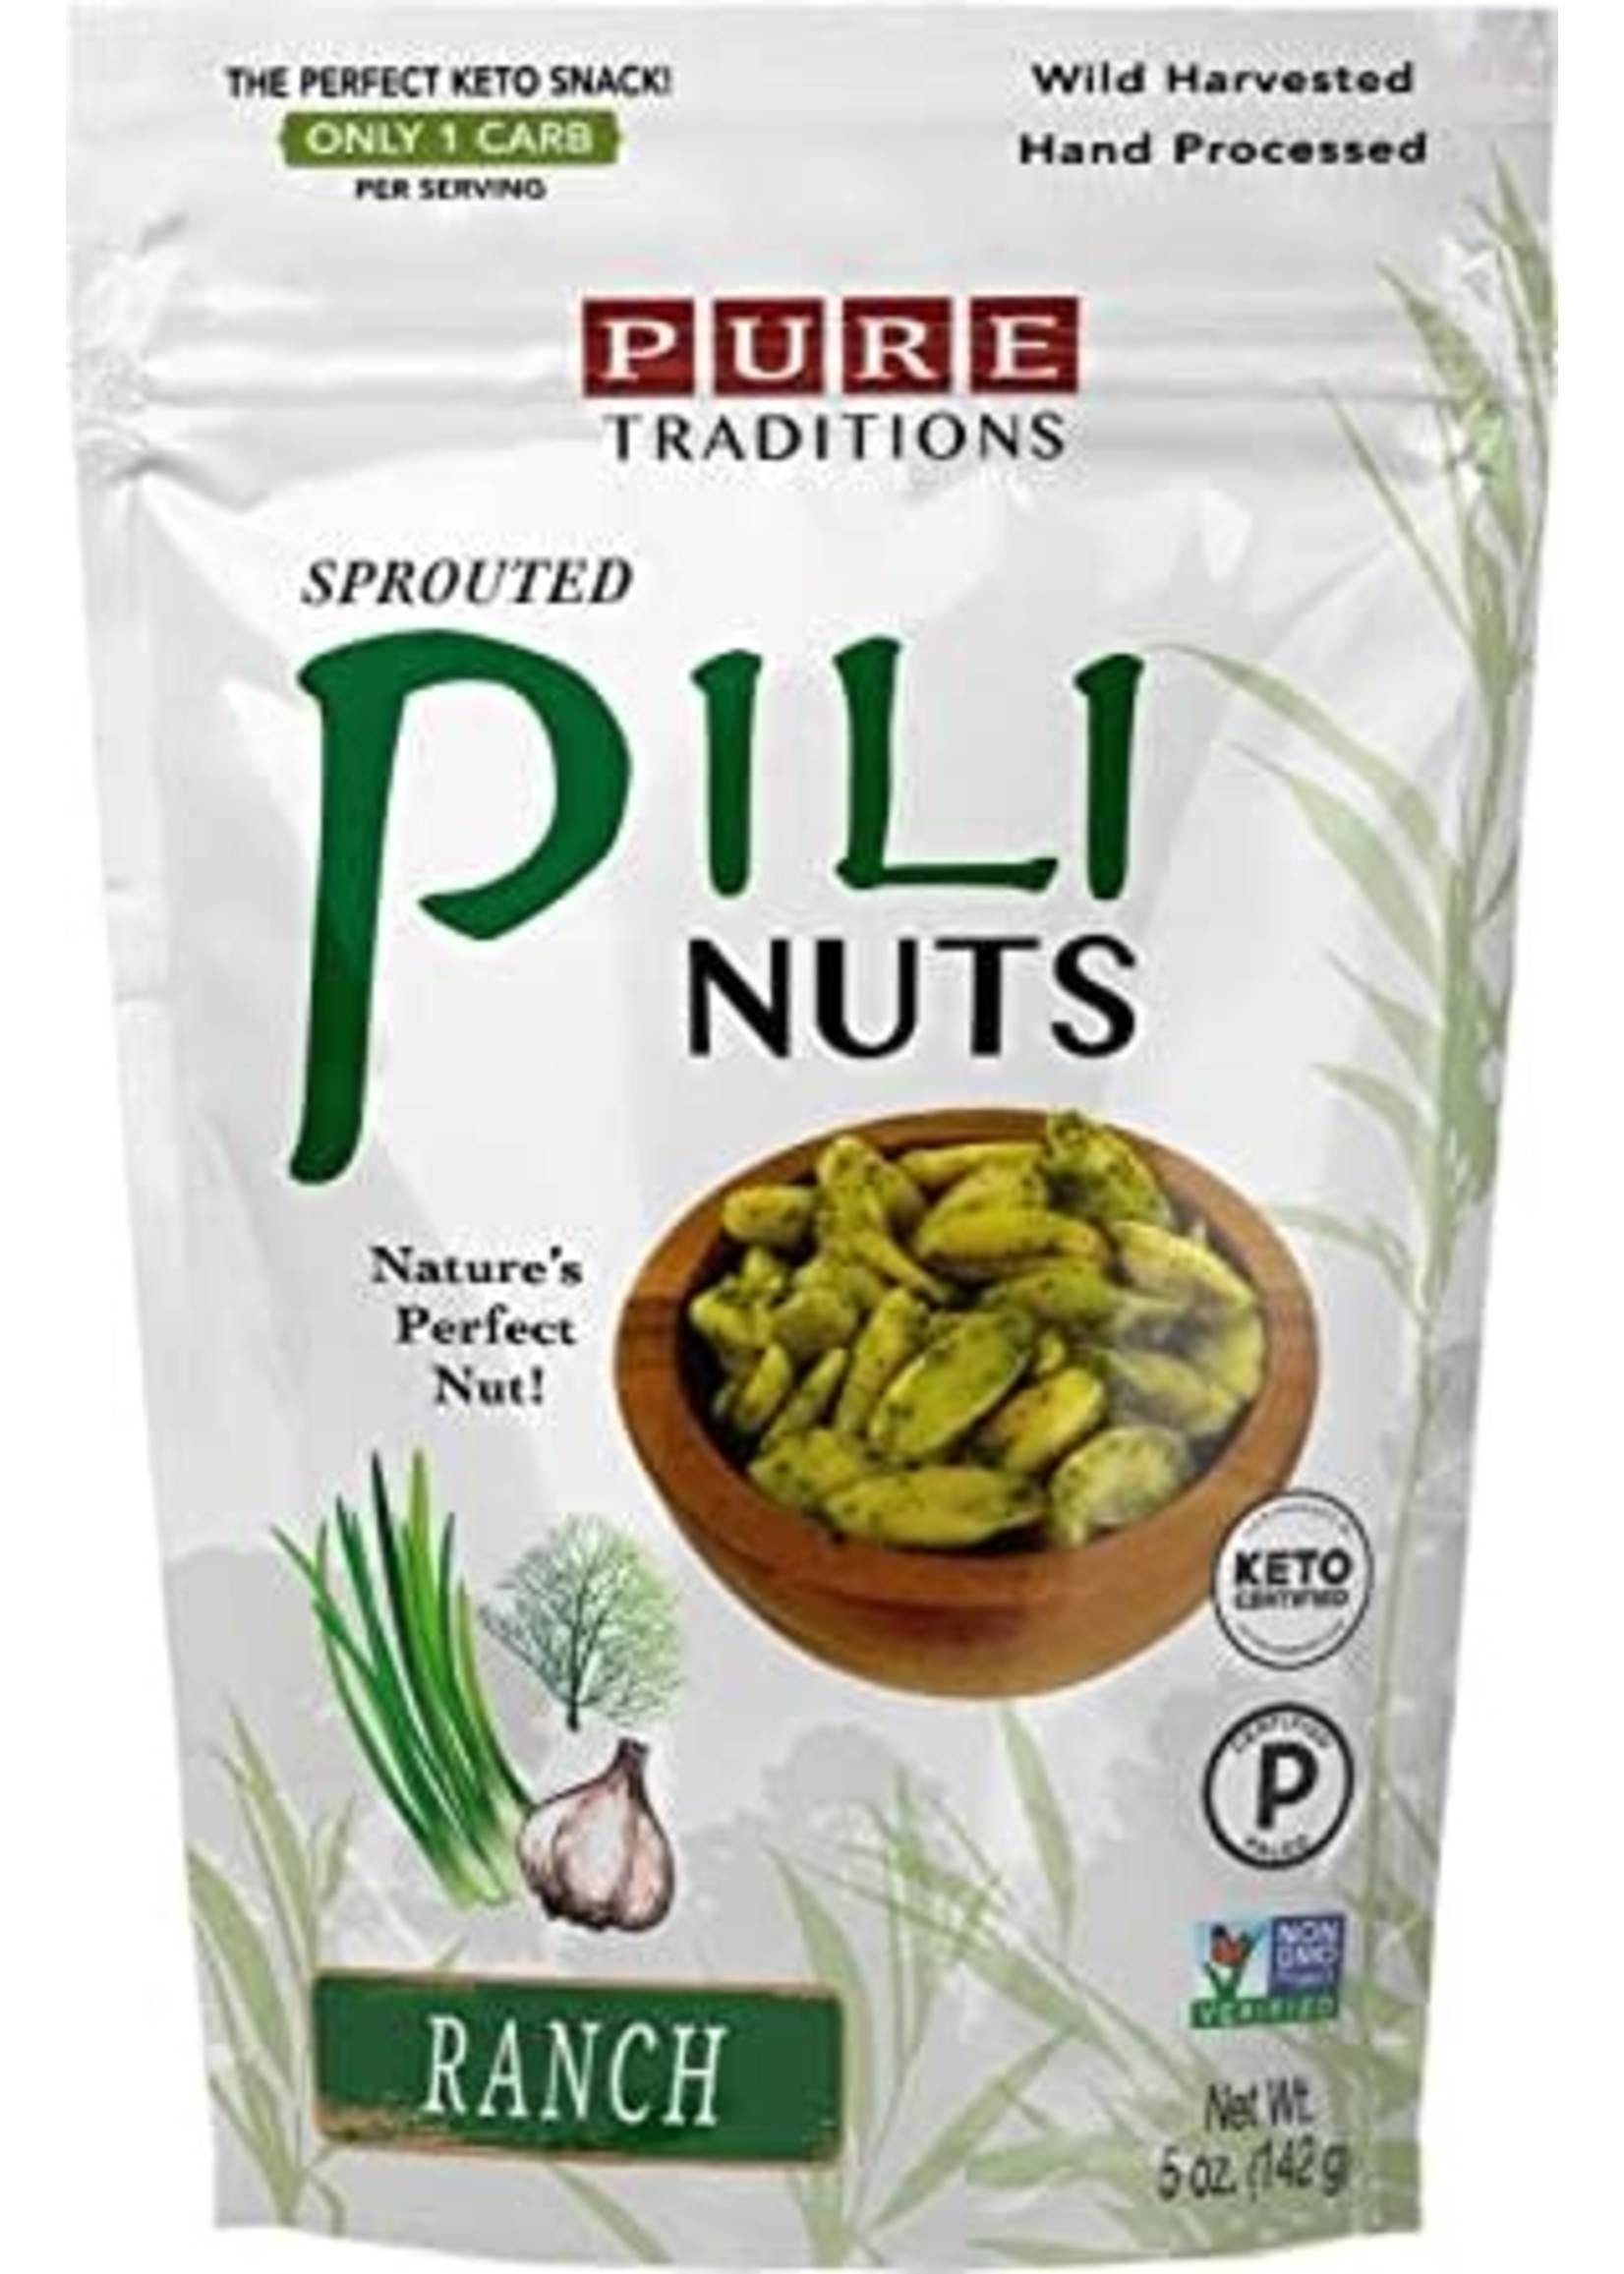 Pure Traditions Pure Traditions- Ranch Pili Nuts 1.7oz